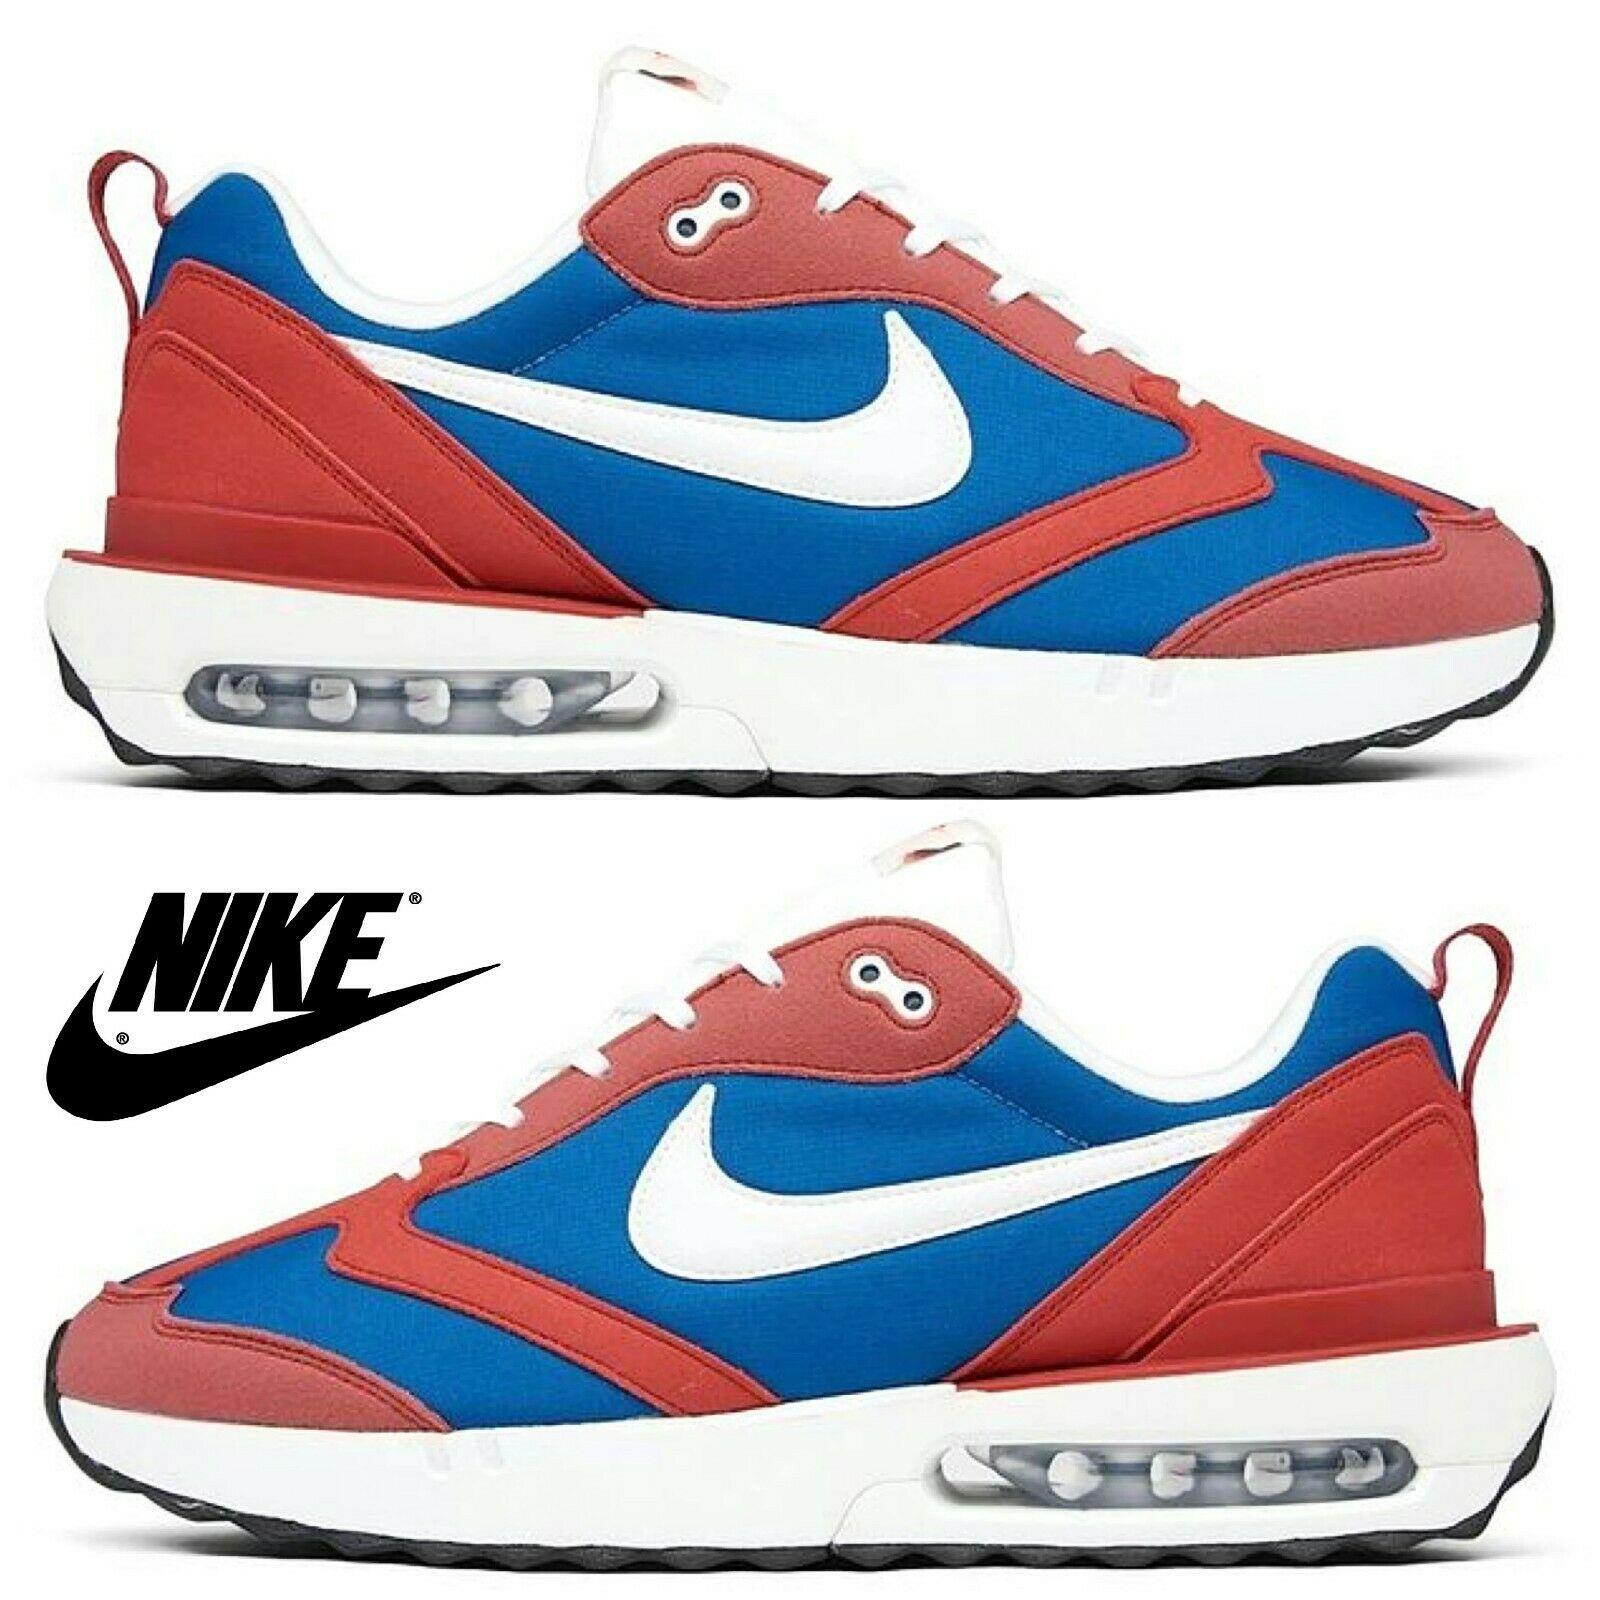 Nike Air Max Dawn Next Nature Men`s Sneakers Running Athletic Comfort Shoes - Blue , Team Royal/Summit White/Red Clay/Light Bone/Black/ Maufacturer